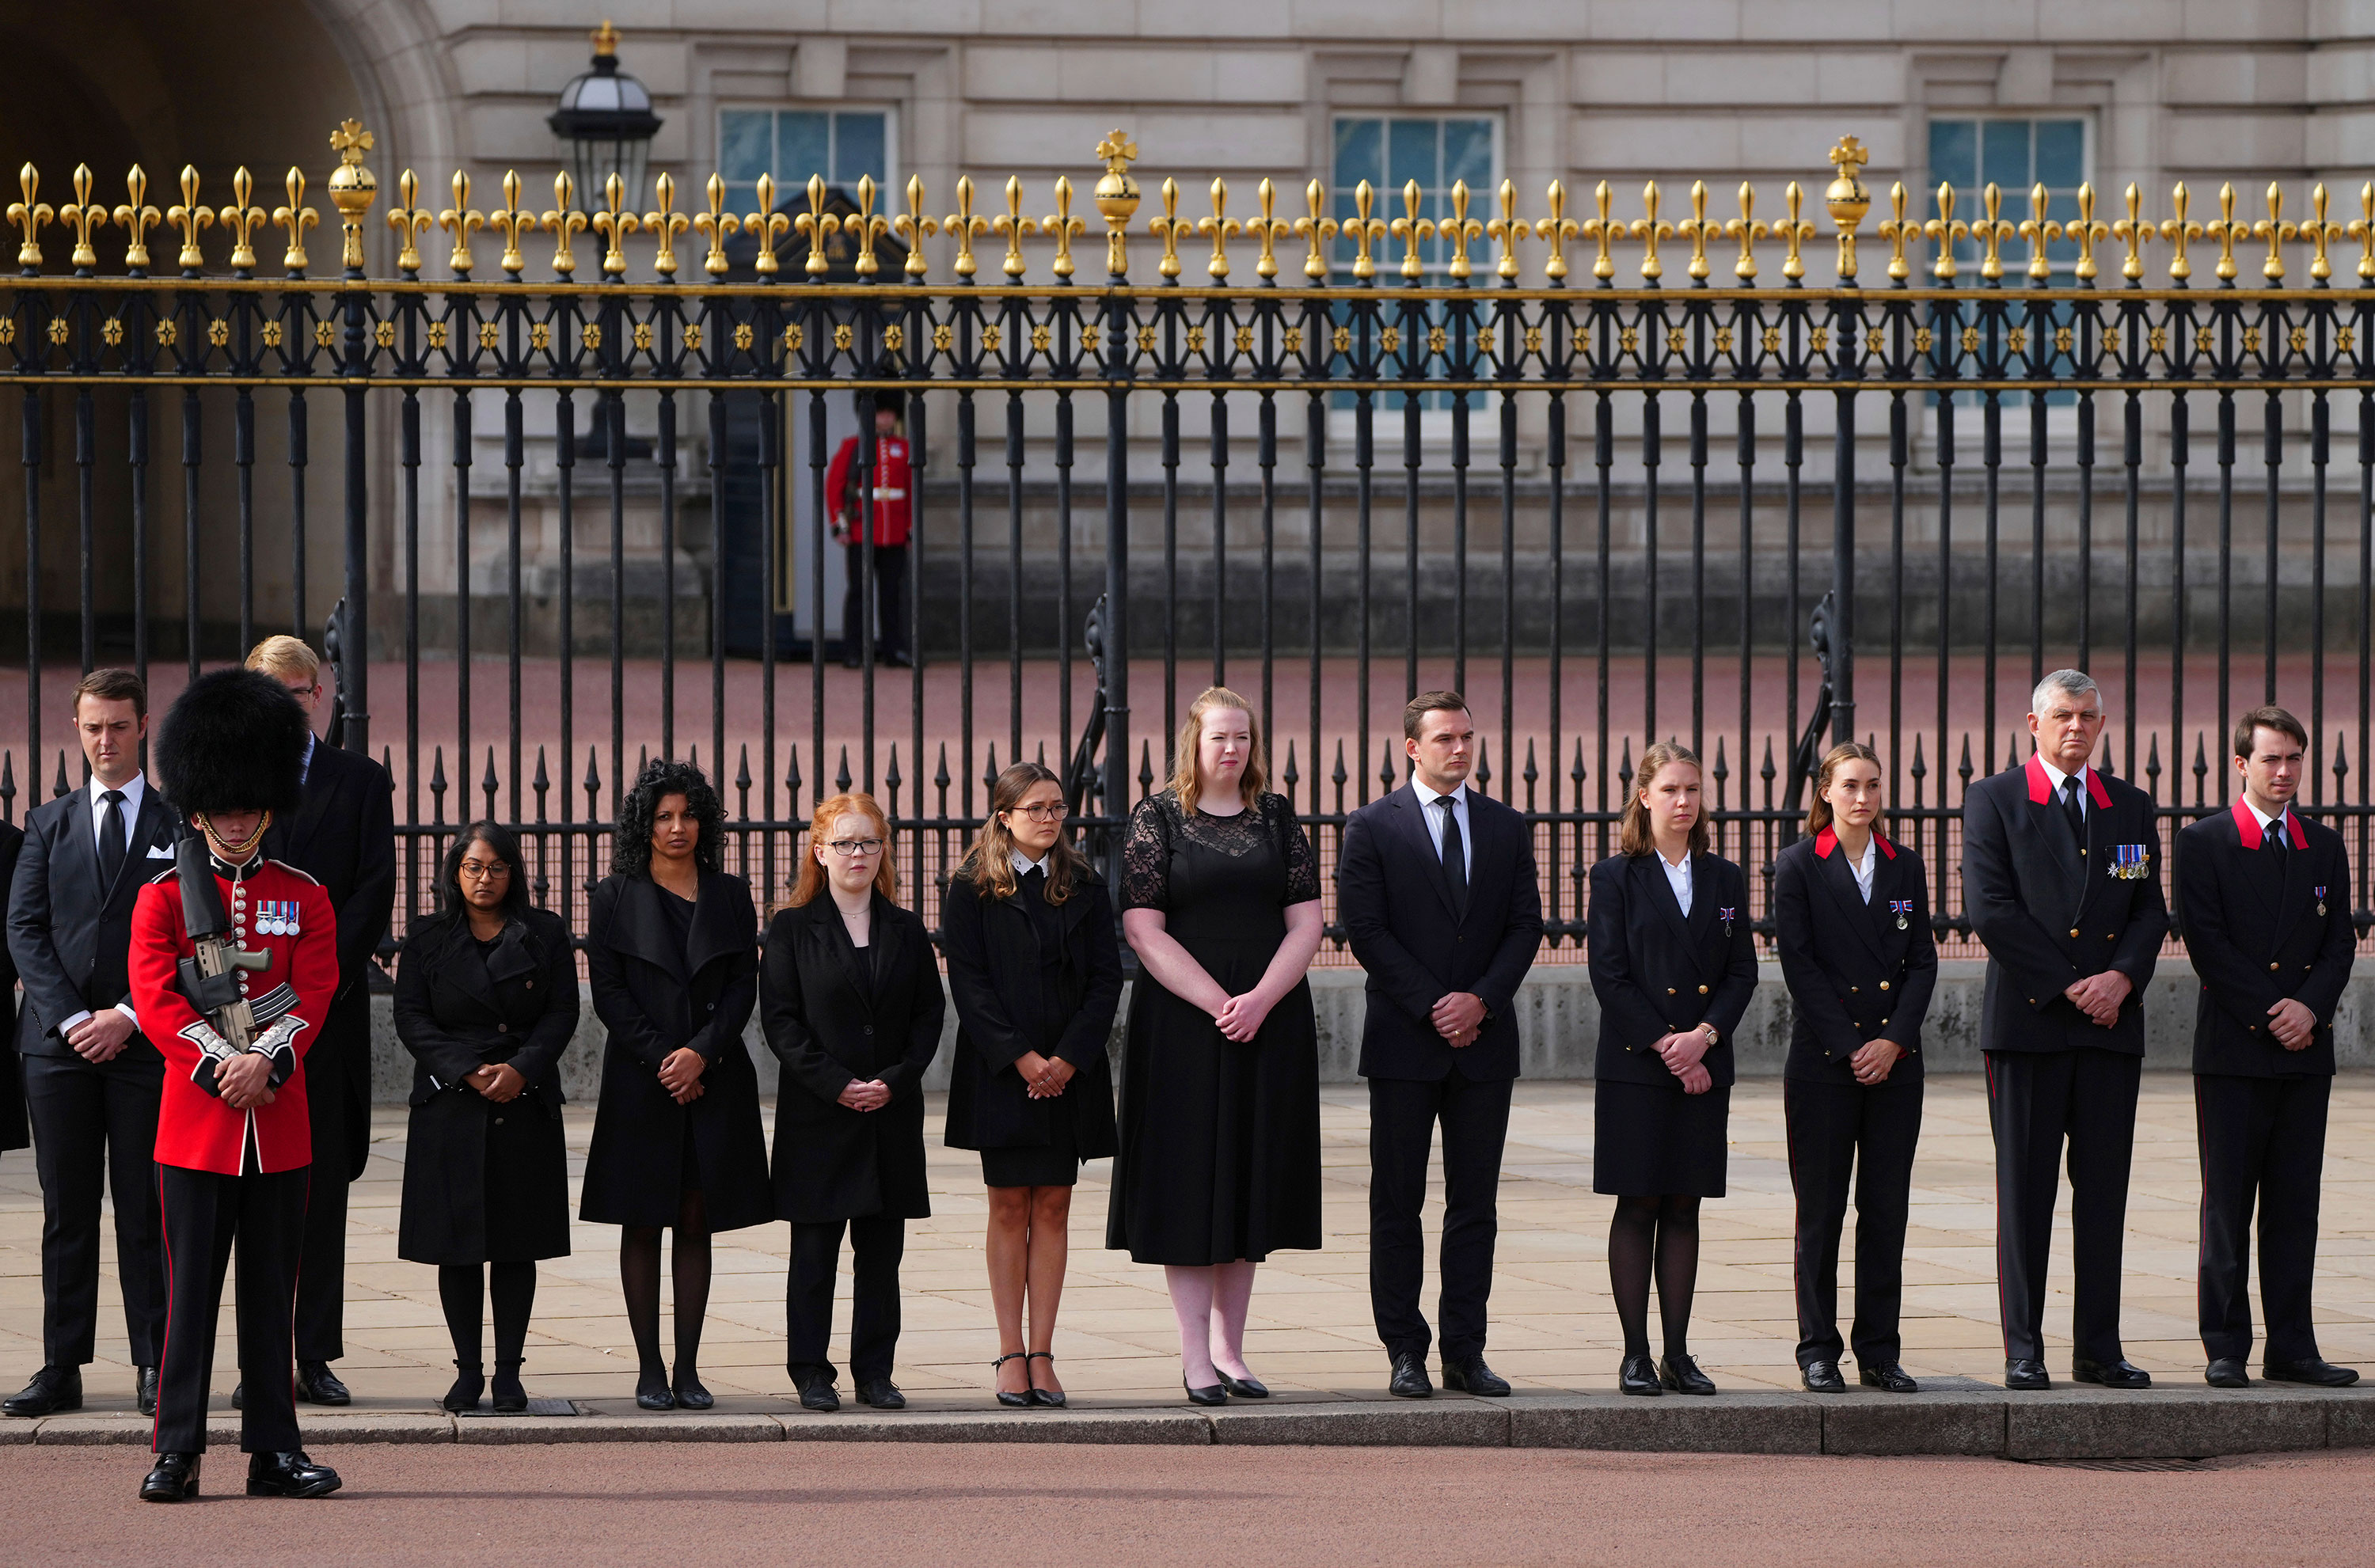 Royal household staff pay their respects outside Buckingham Palace.